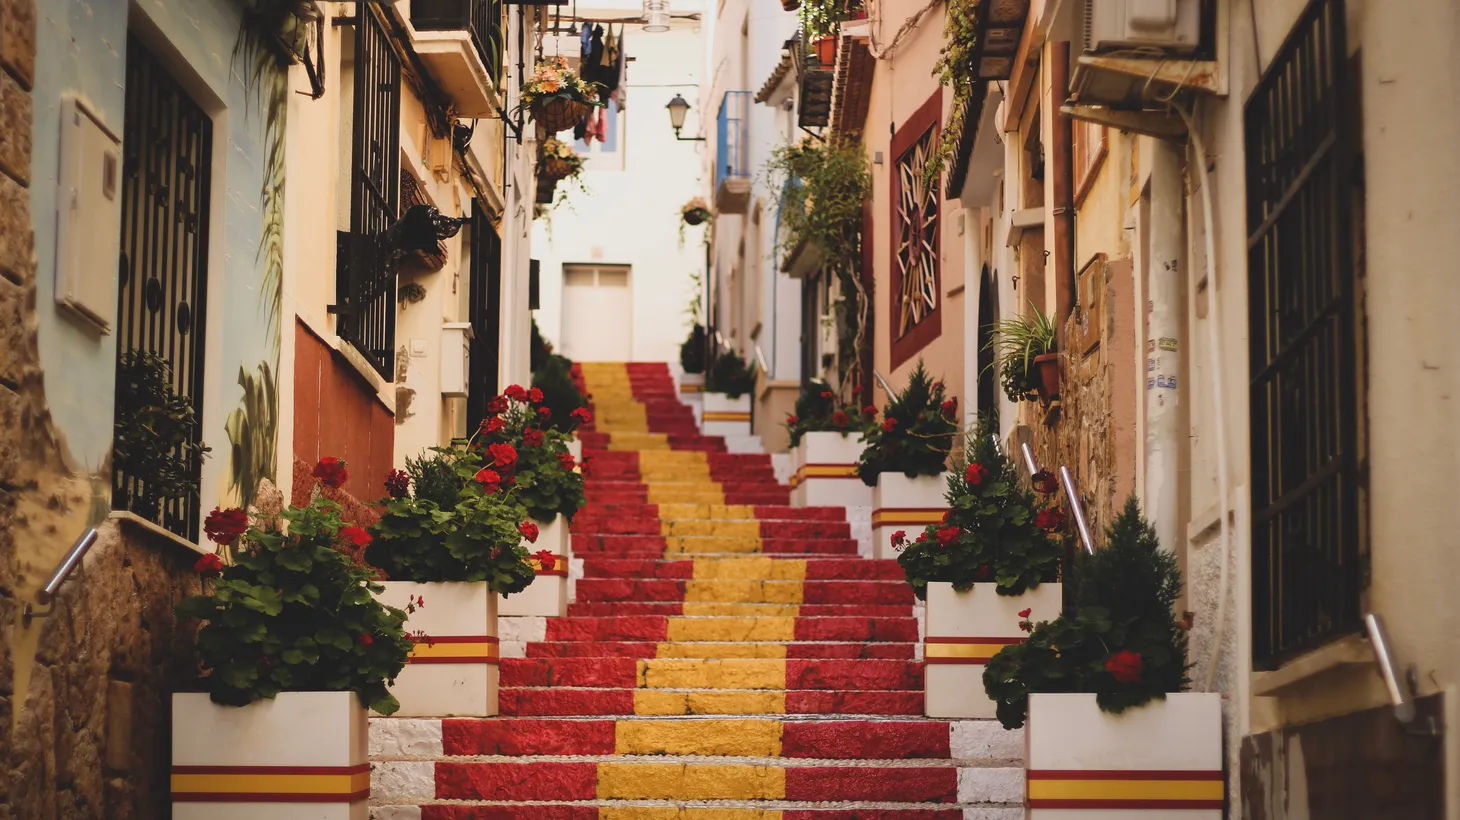 Steps in Old Town, Calp, Spain, are painted yellow and red, in keeping with Spain's flag.